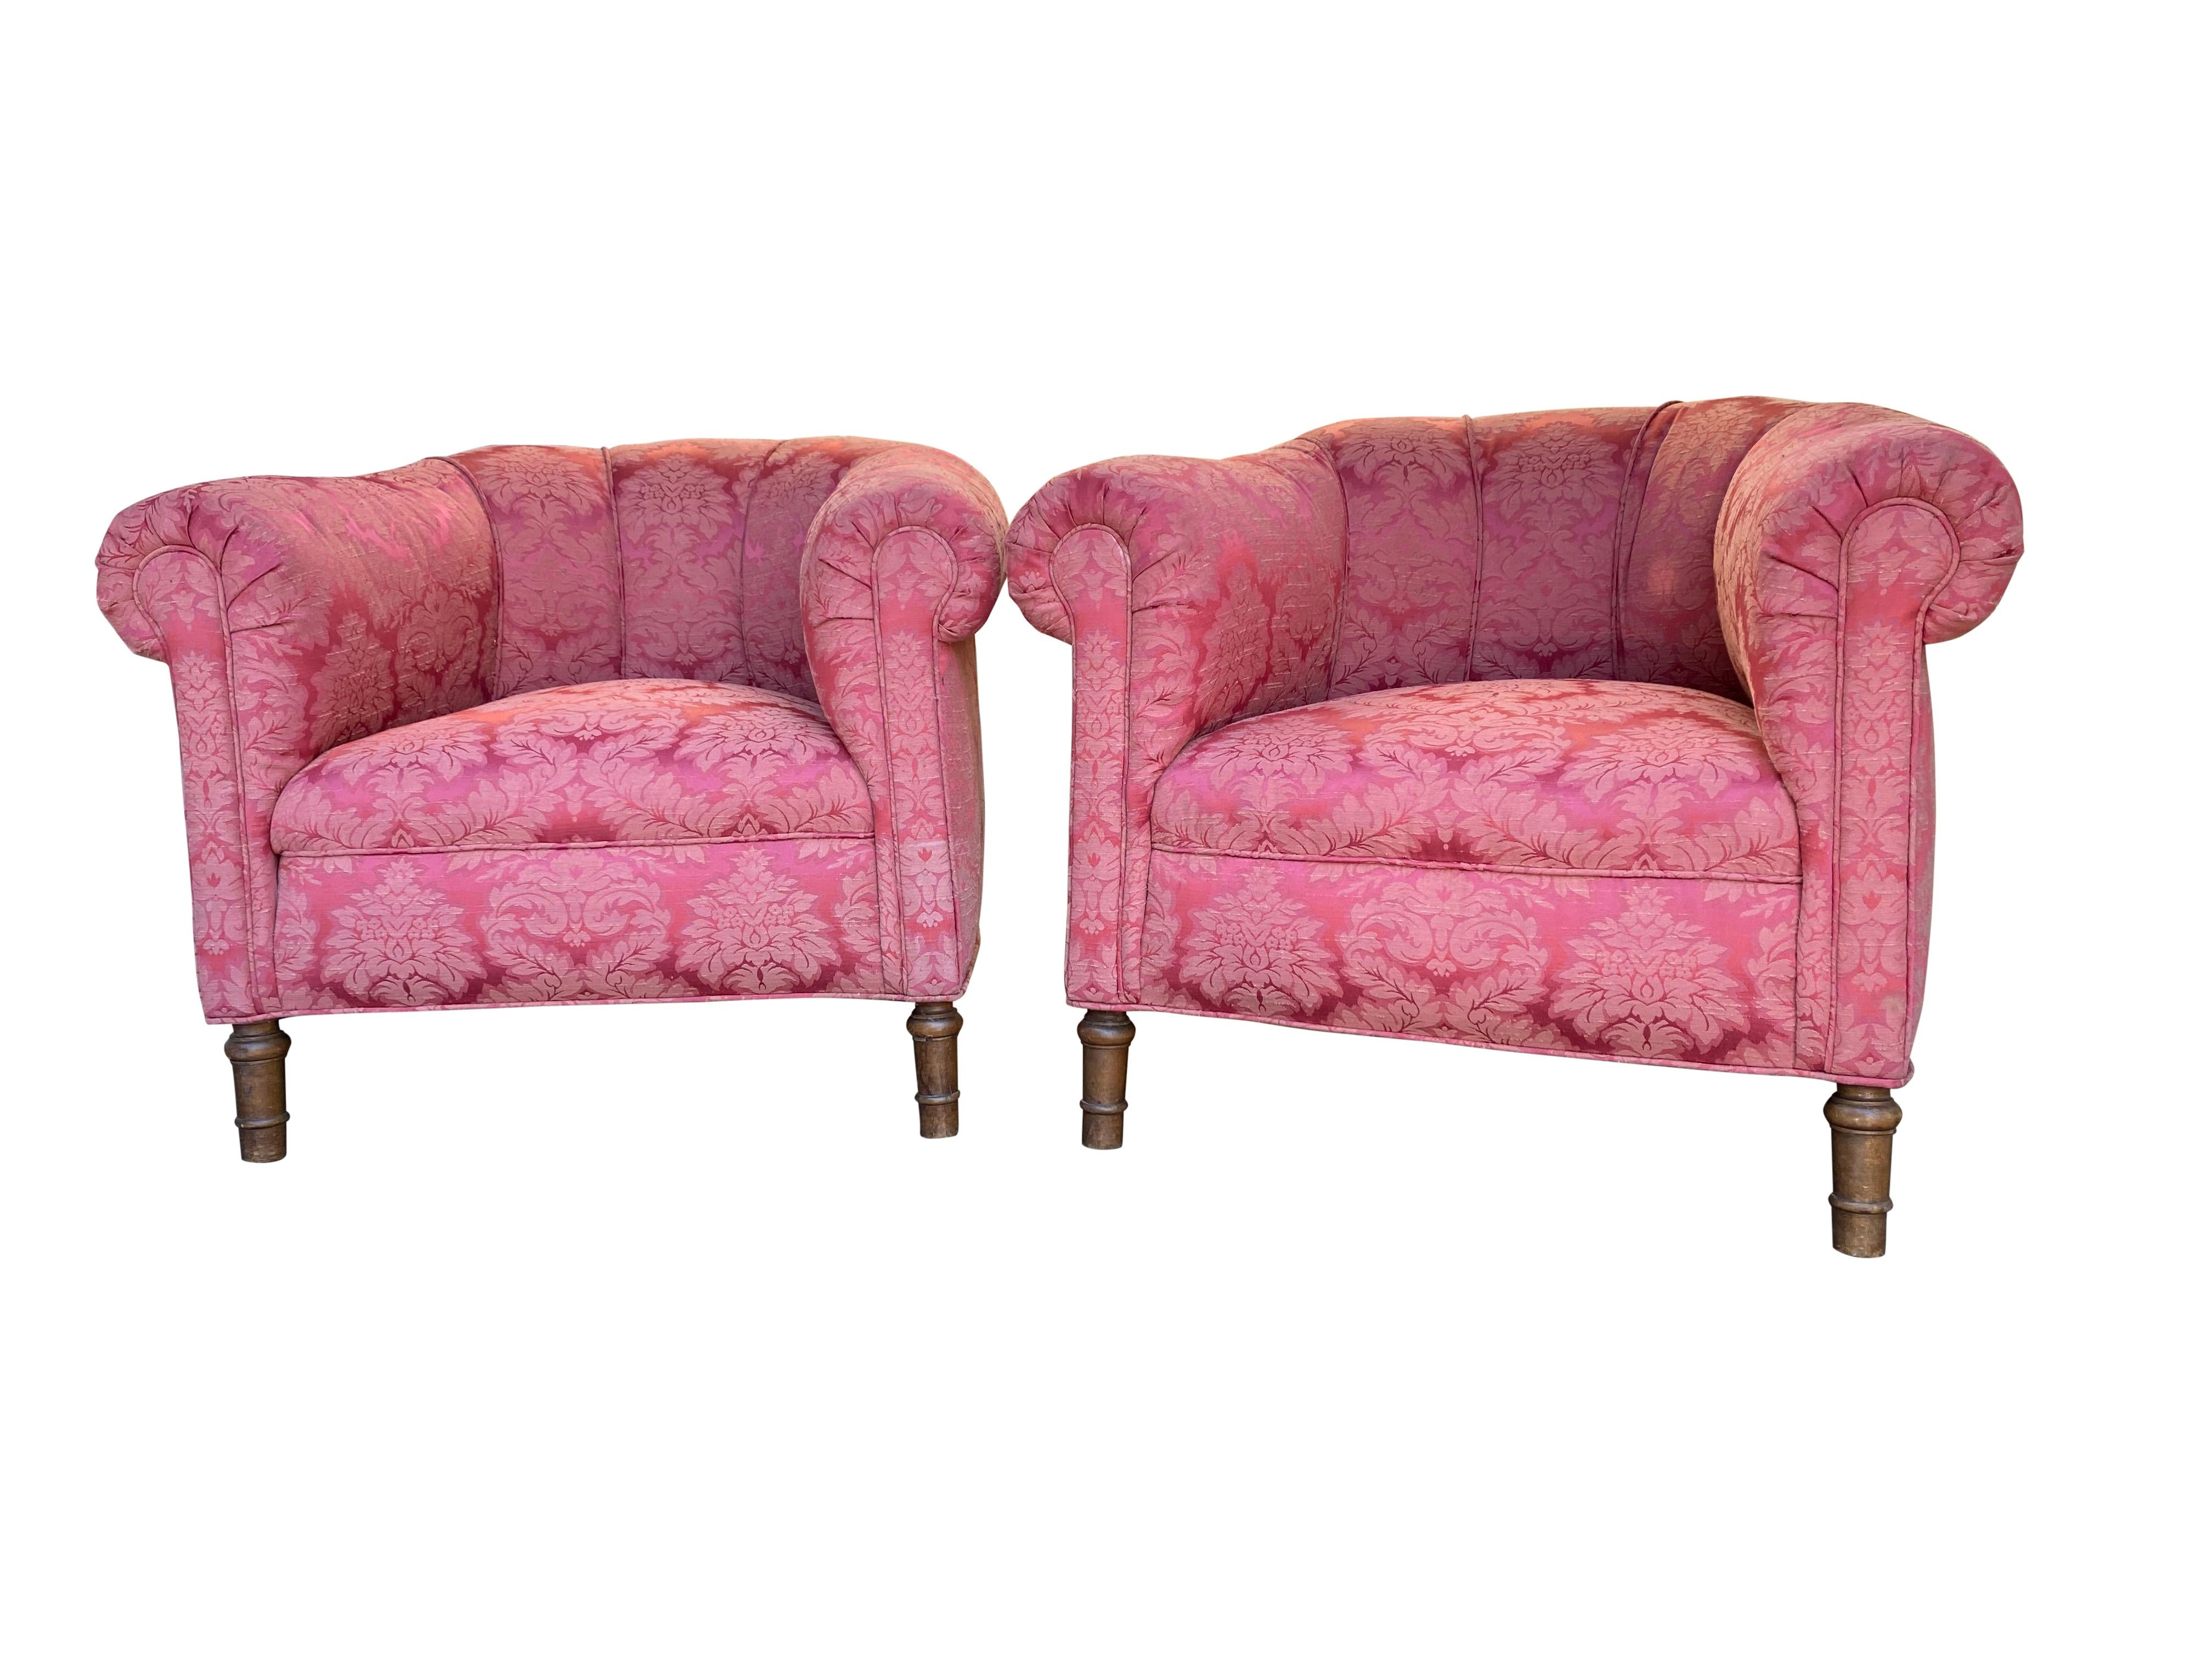 Pair of 1920s Club Chairs in Damask Floral Design In Good Condition For Sale In London, GB